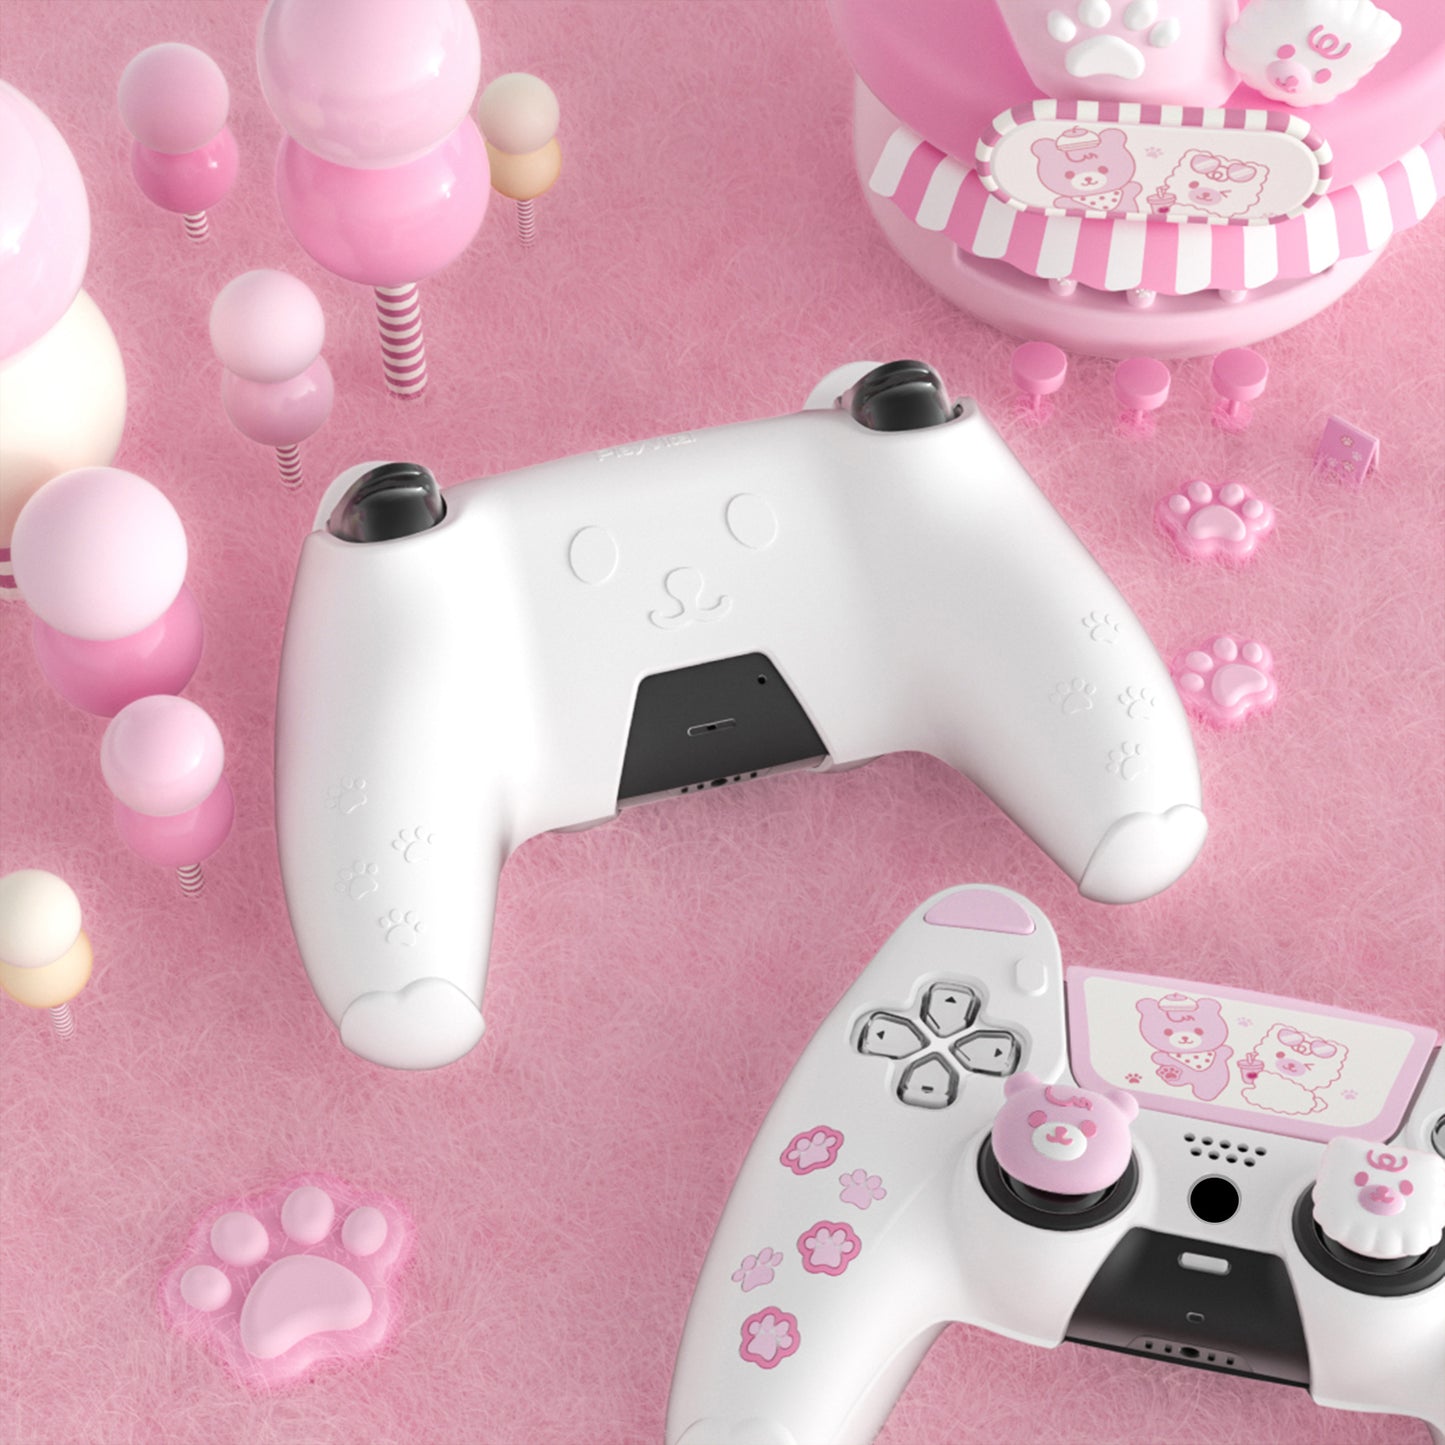 PlayVital Cute Bear Controller Silicone Case with Thumb Grips for PS5 Wireless Controller, Compatible with Charging Station - White & Pink - UYBPFP003 PlayVital